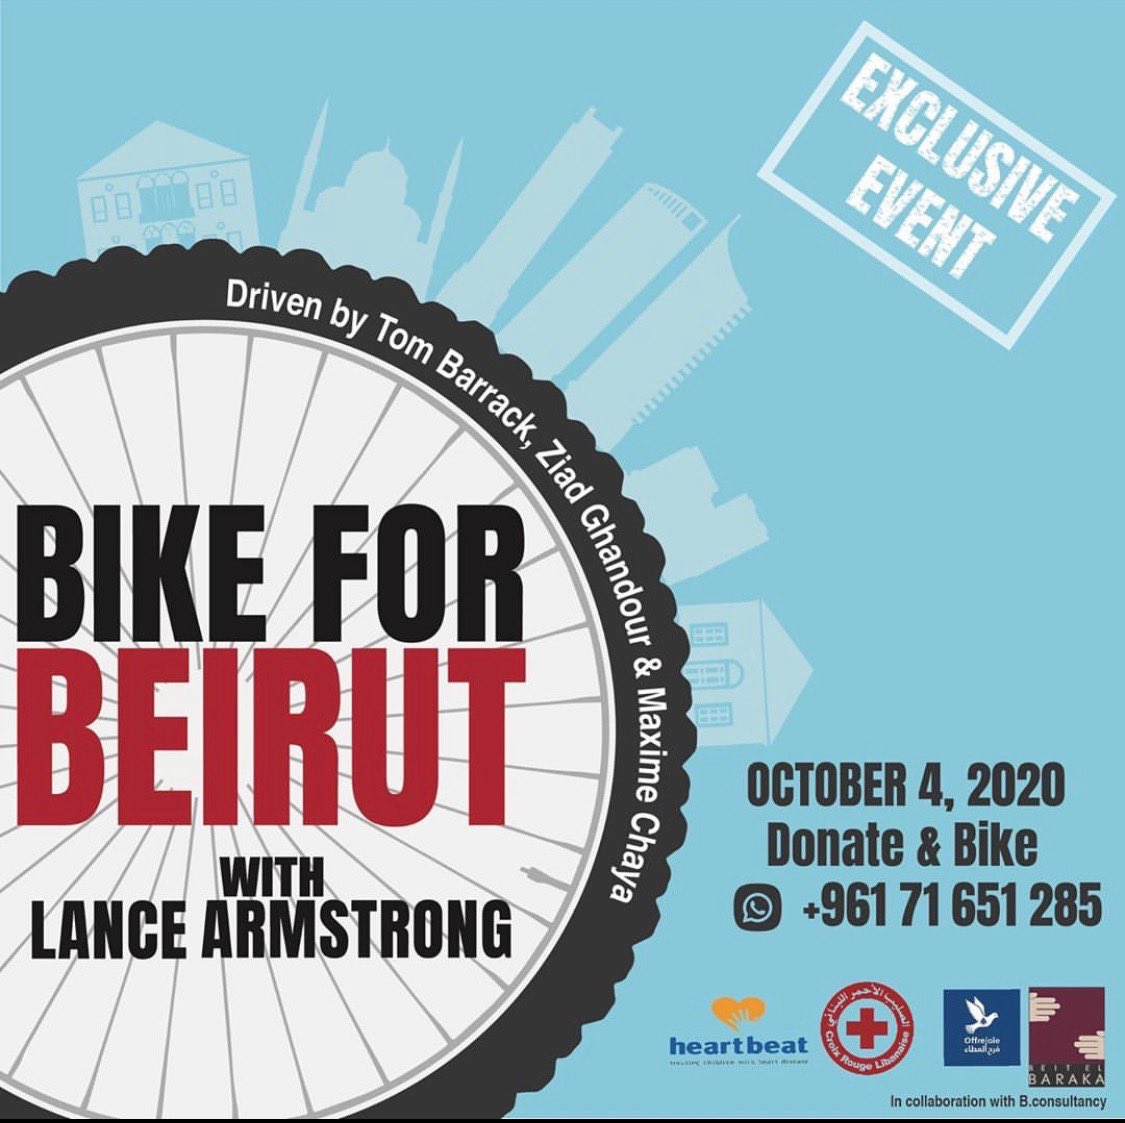 Honored to be in Beirut for this ride. 🙌 